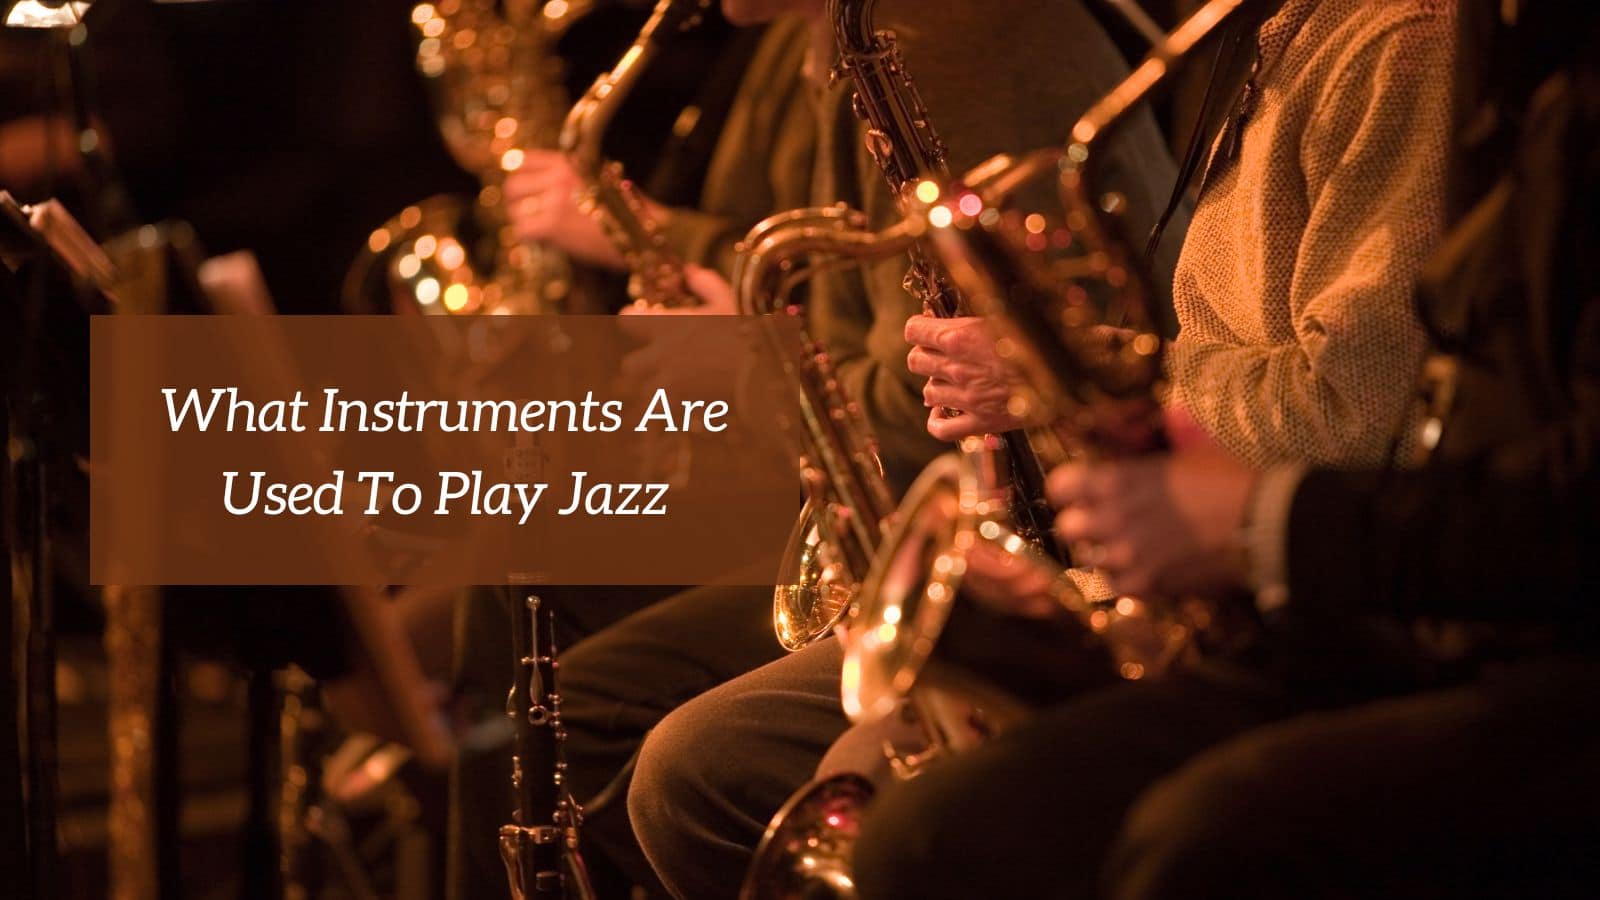 What Instruments Are Used To Play Jazz